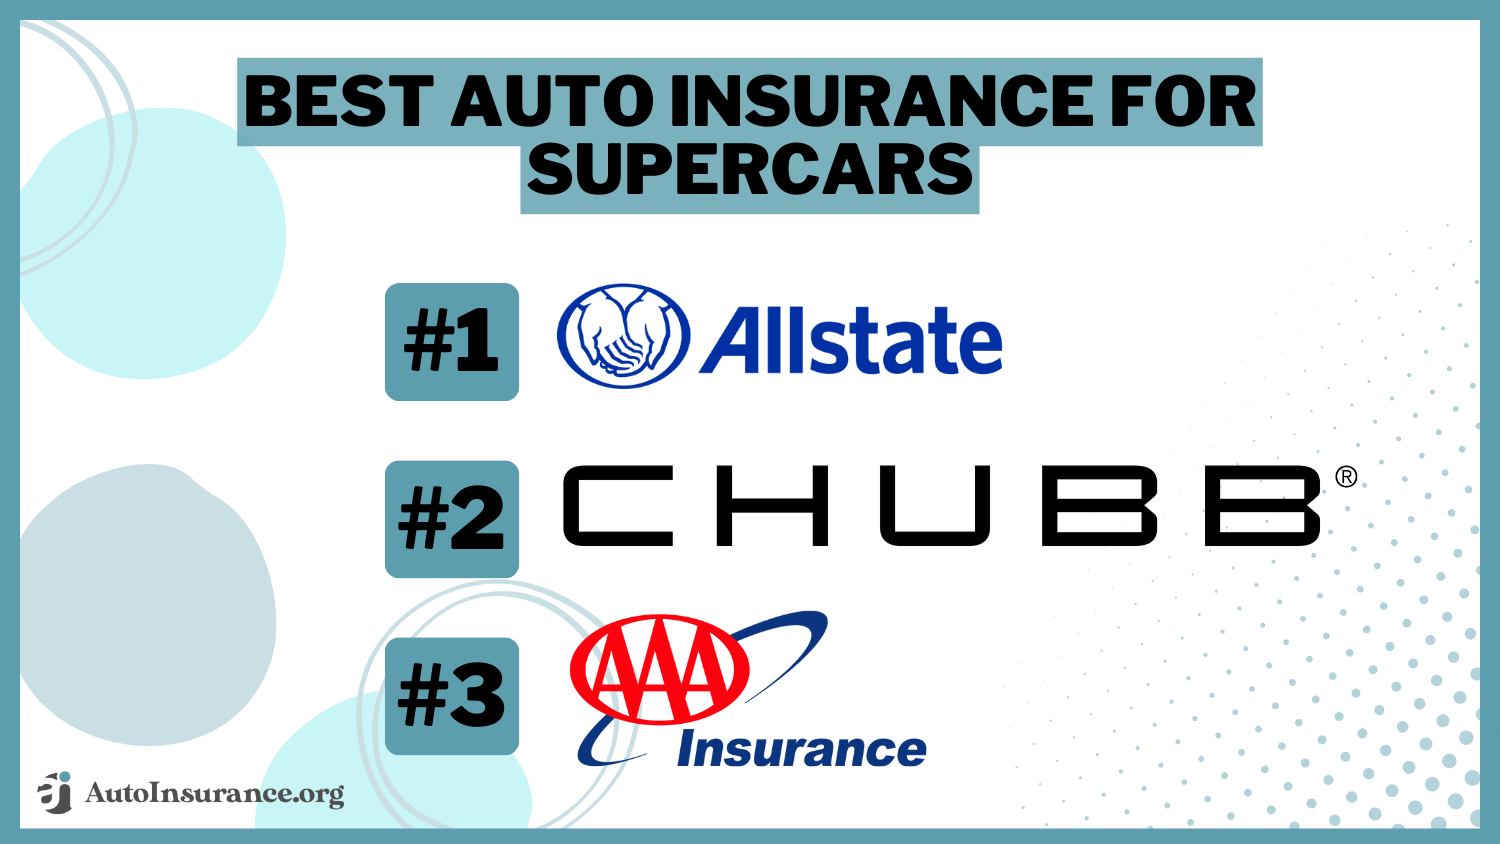 best auto insurance for supercars: Allstate, Chubb, AAA